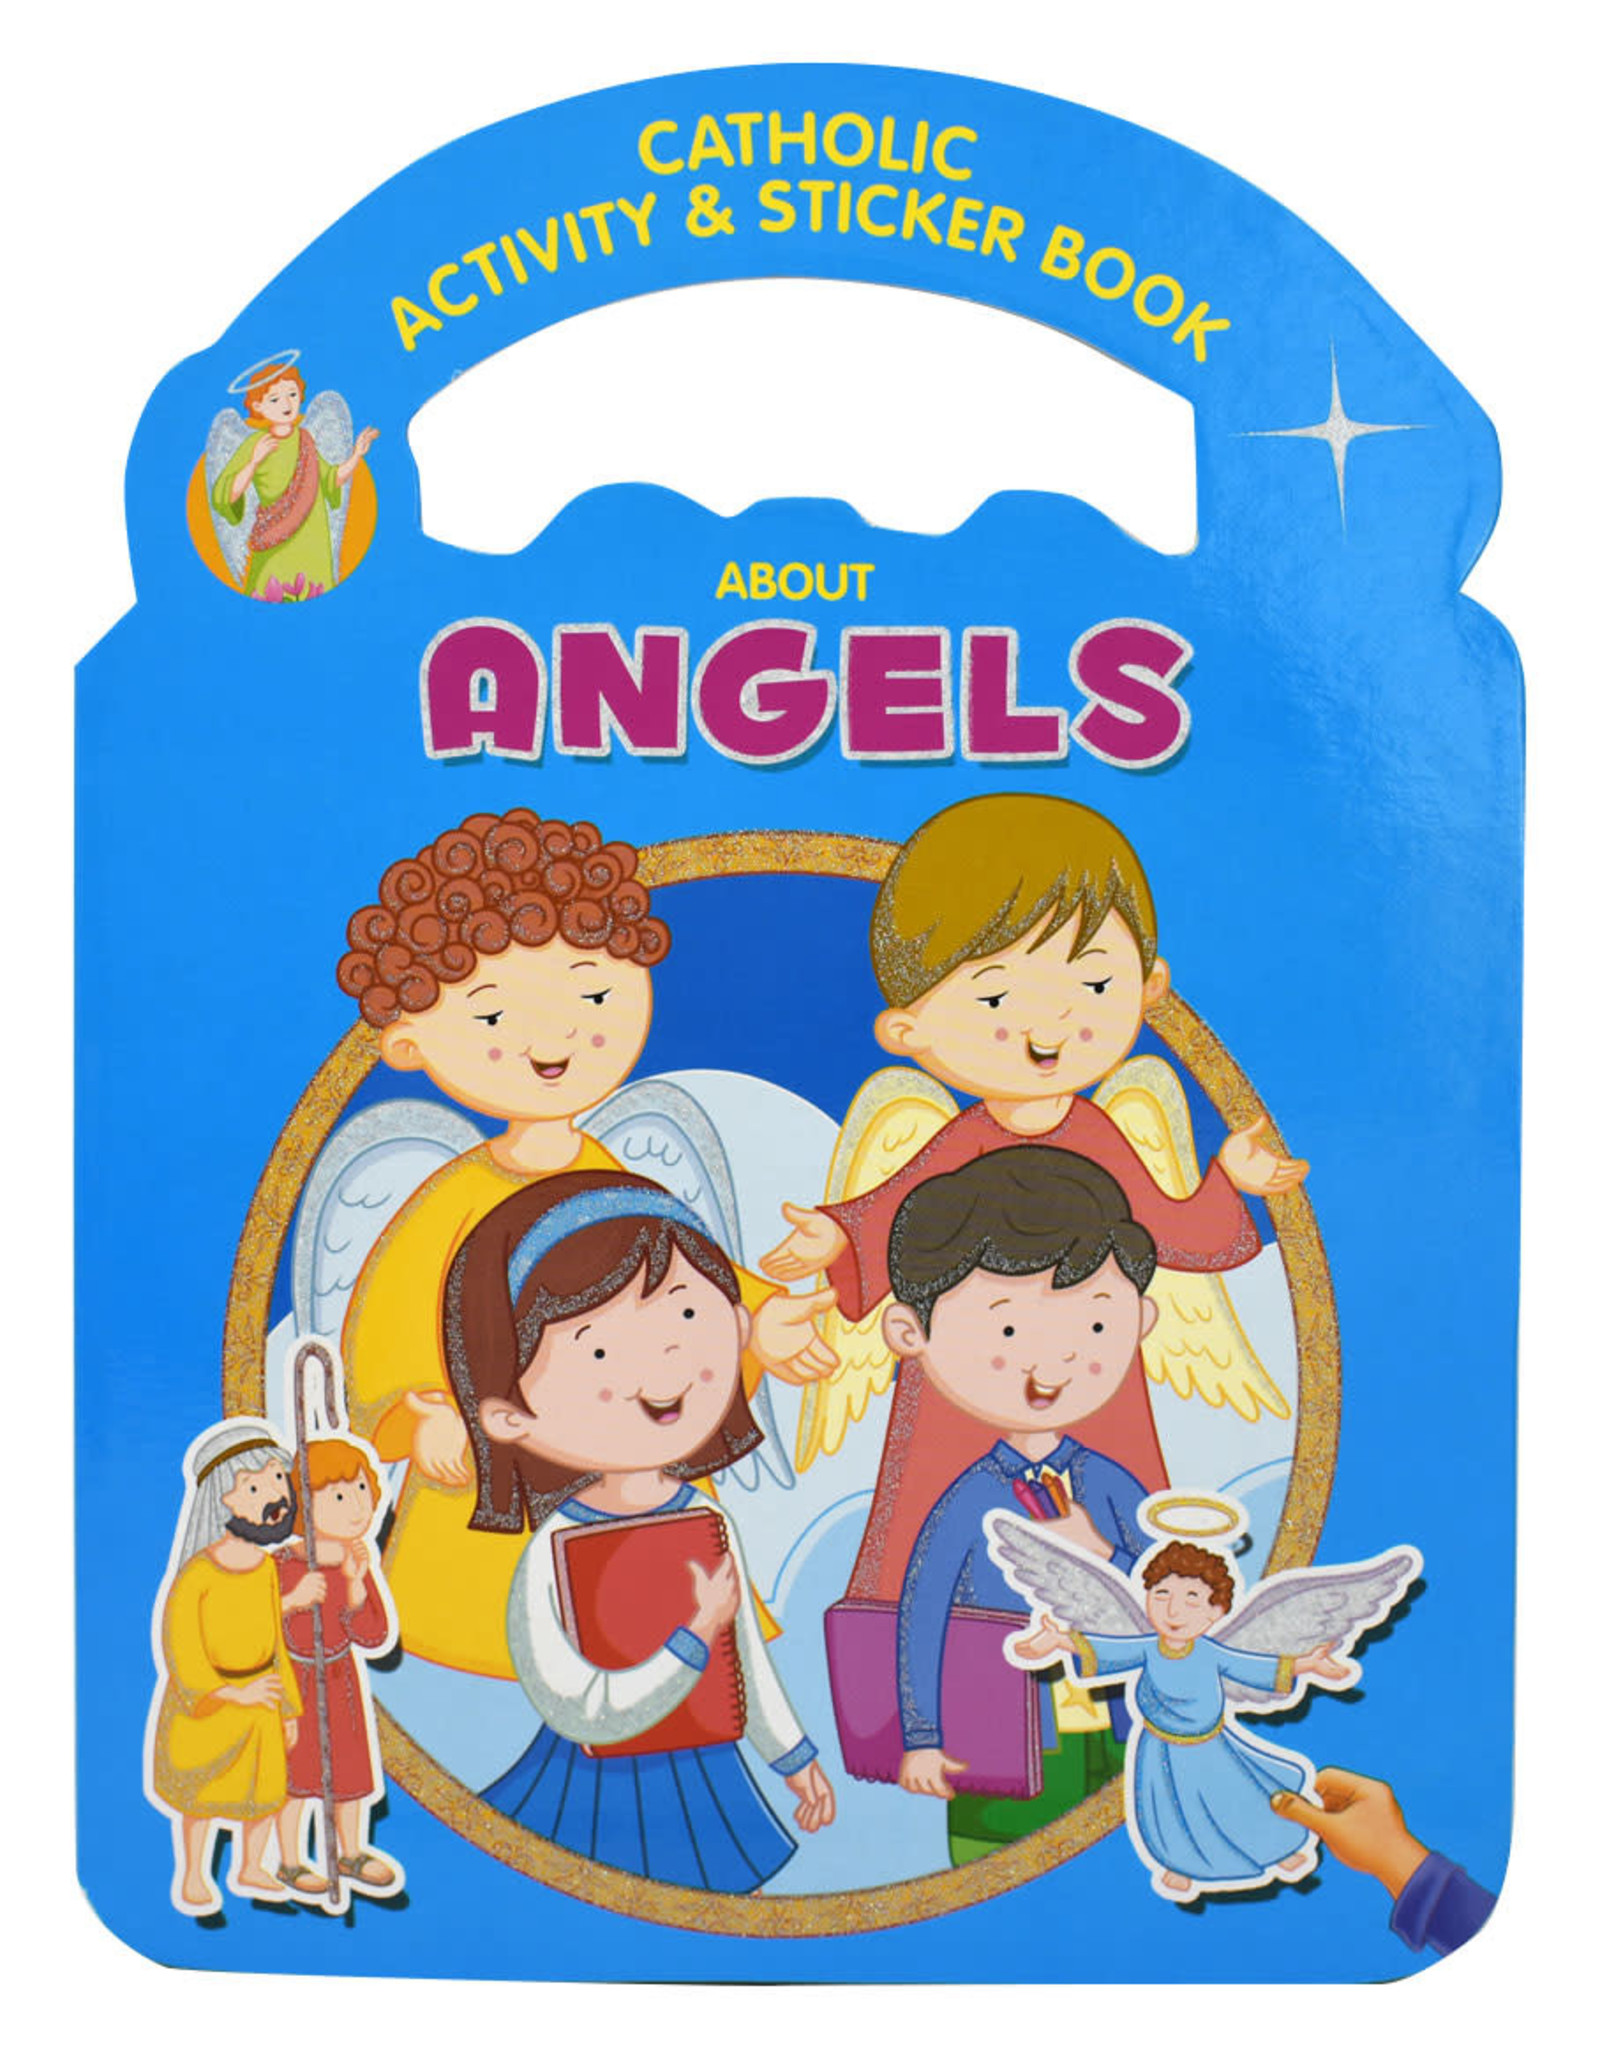 Catholic Activity & Sticker Book About Angels